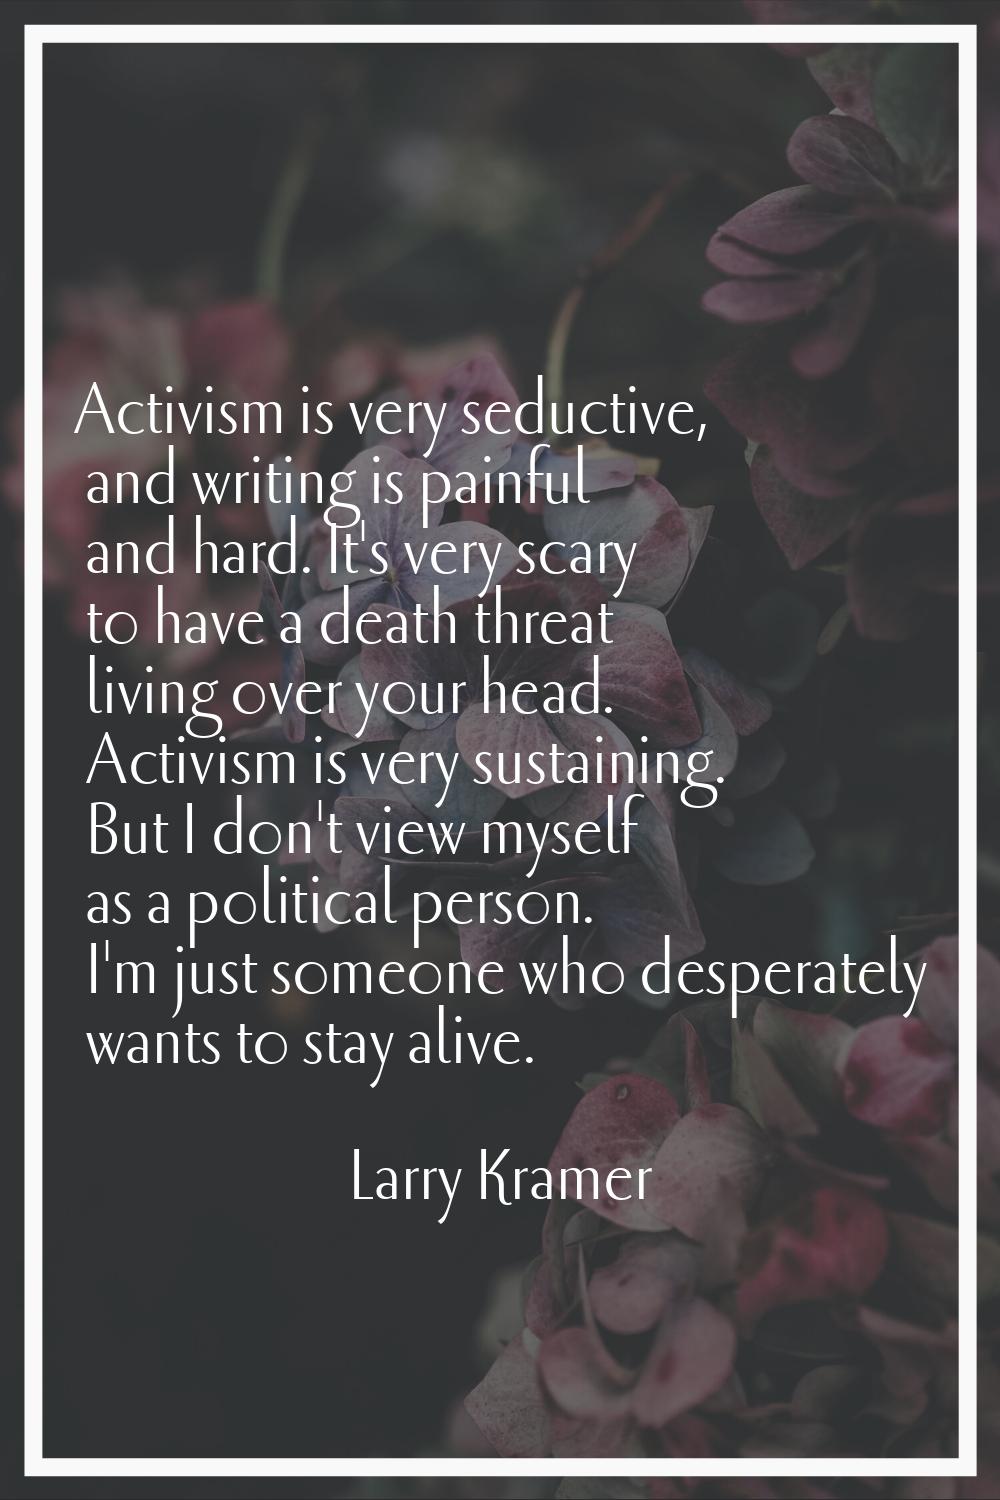 Activism is very seductive, and writing is painful and hard. It's very scary to have a death threat